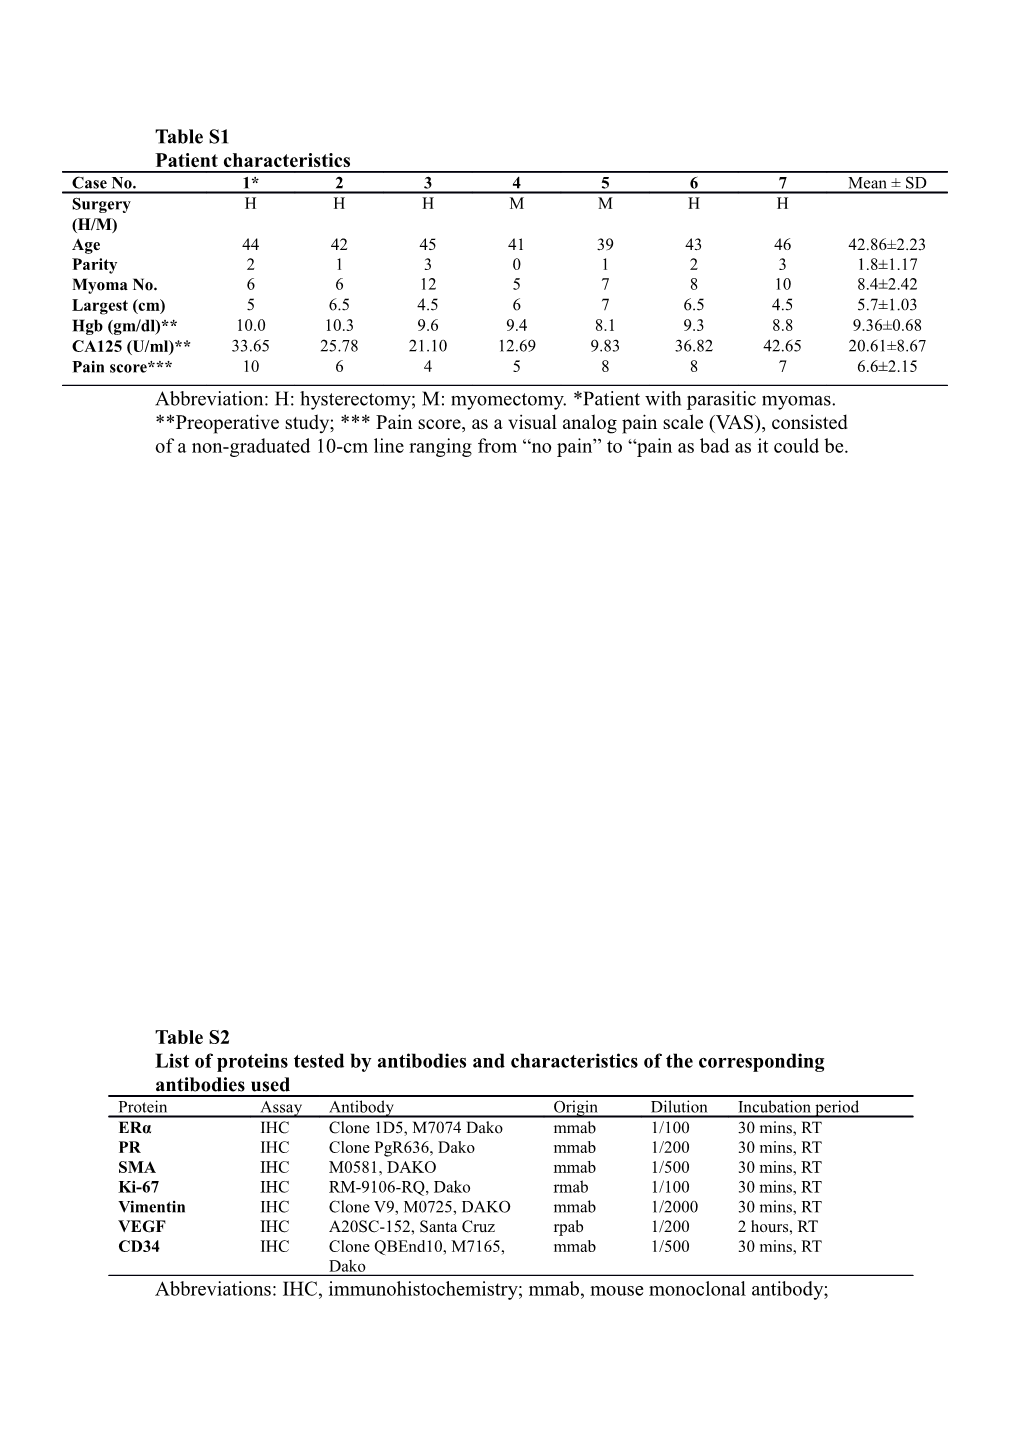 List of Proteins Tested by Antibodies and Characteristics of the Corresponding Antibodies Used